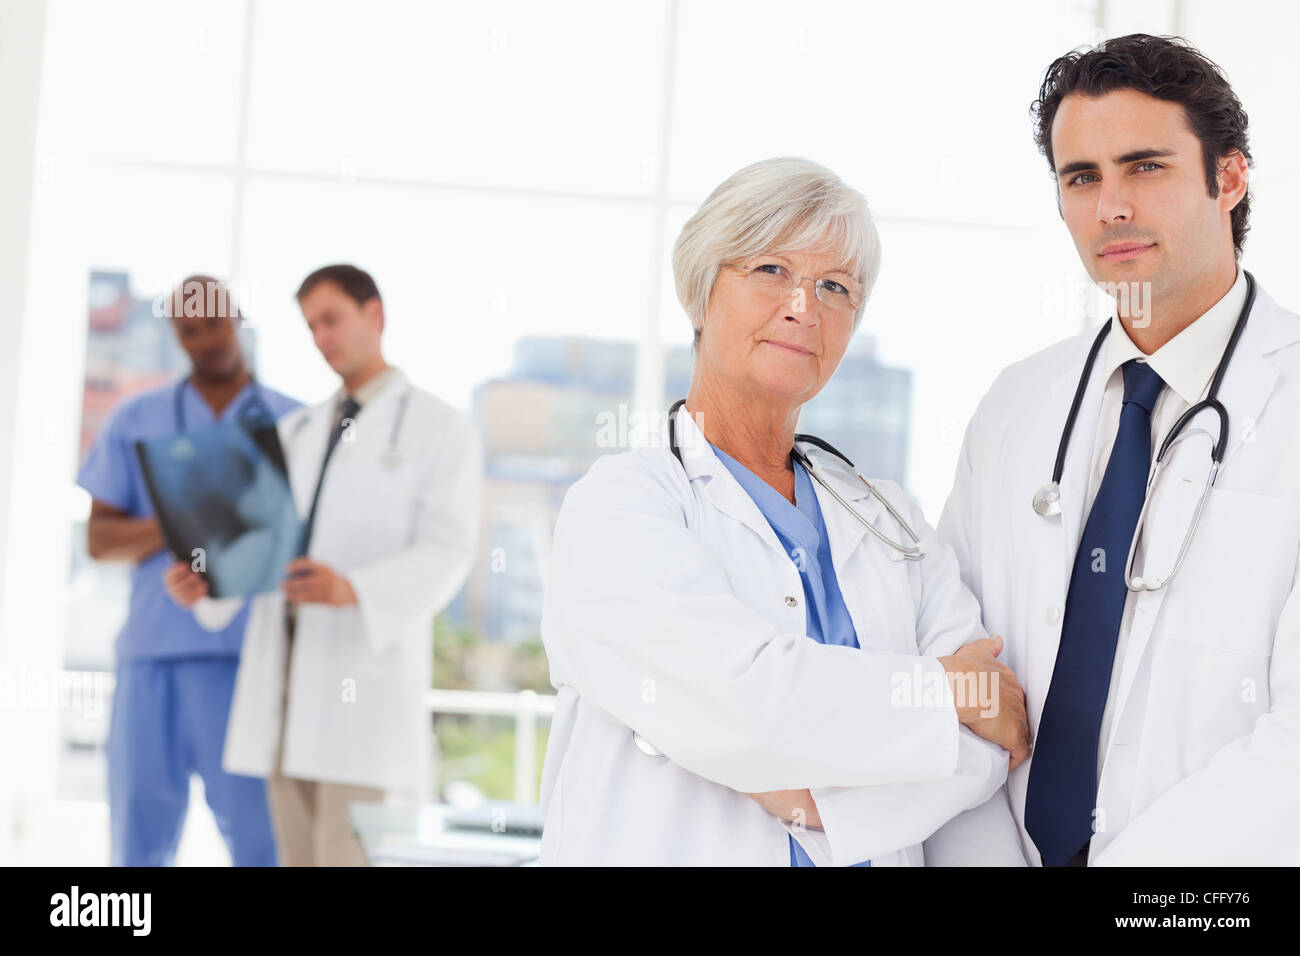 Confident doctors with colleagues behind them Stock Photo